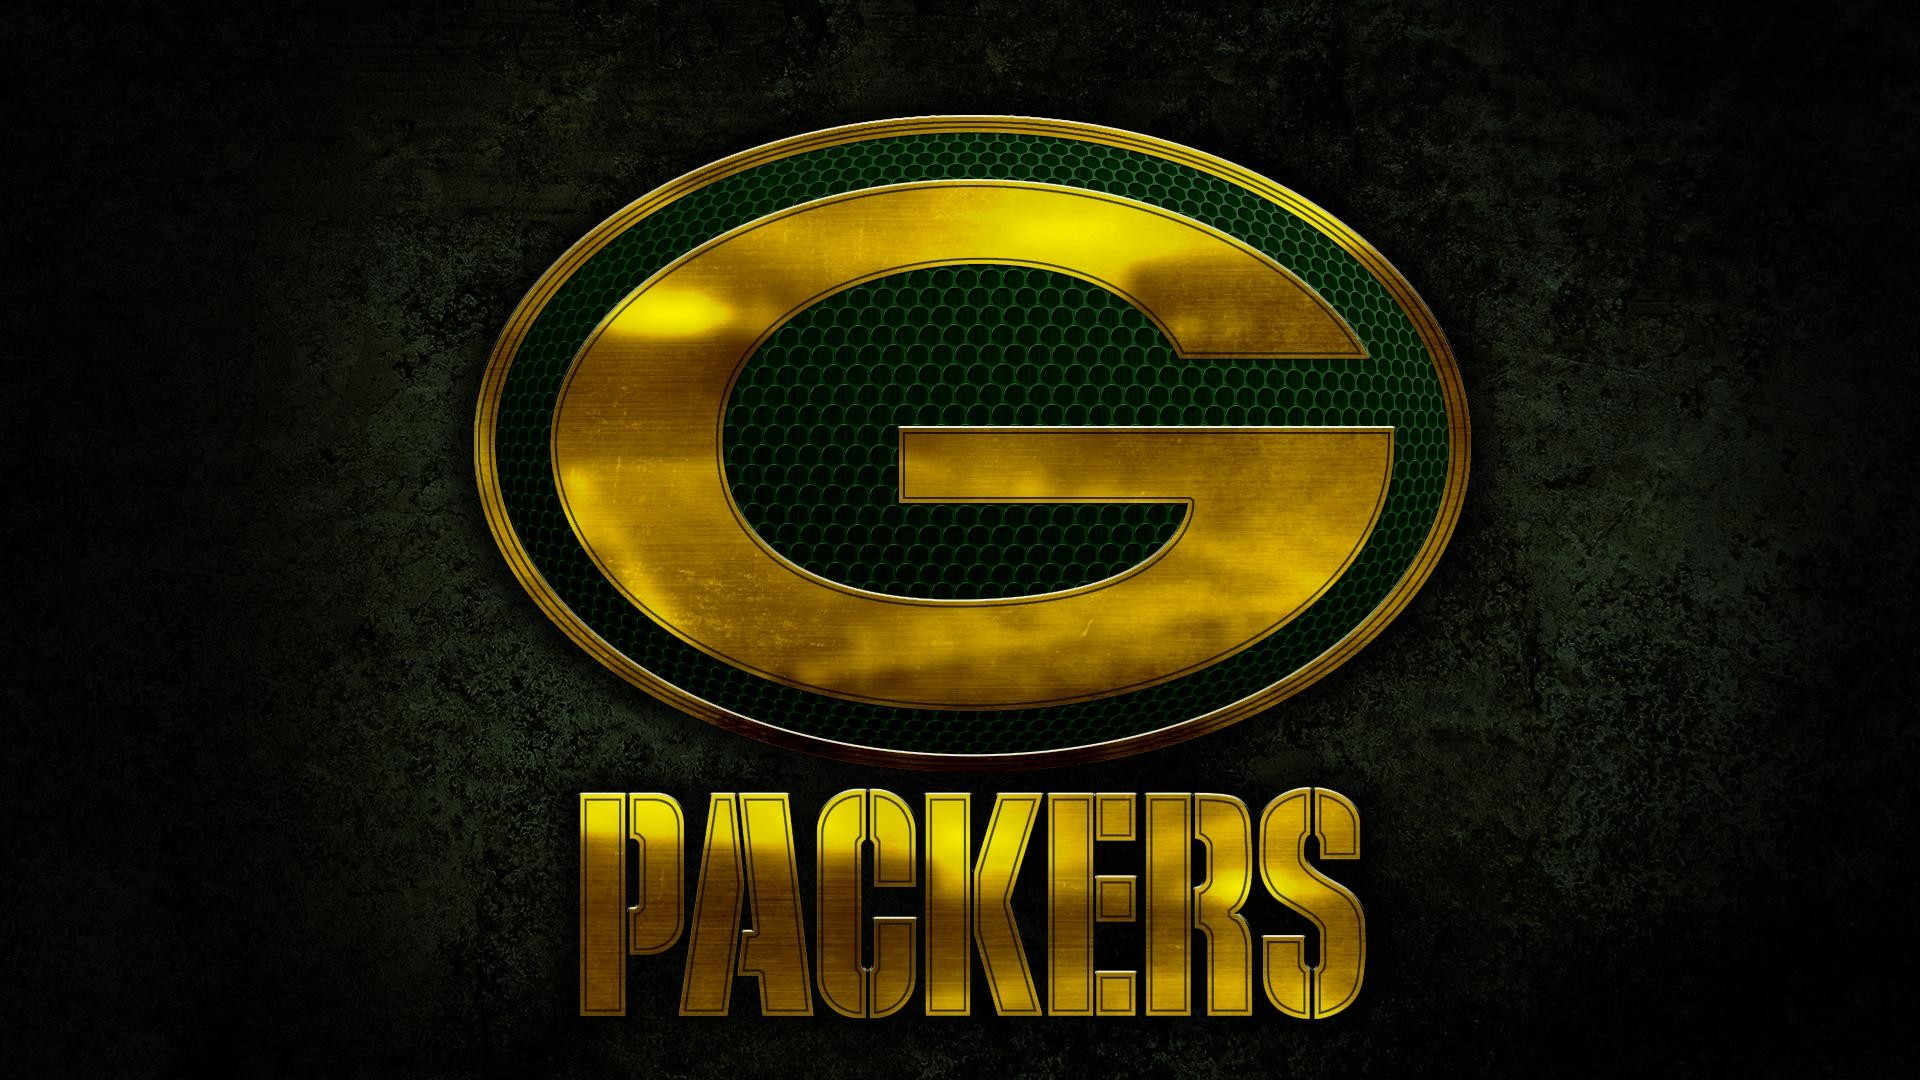 Green Bay Packers Wallpaper HD Computer with high-resolution 1920x1080 pixel. You can use and set as wallpaper for Notebook Screensavers, Mac Wallpapers, Mobile Home Screen, iPhone or Android Phones Lock Screen